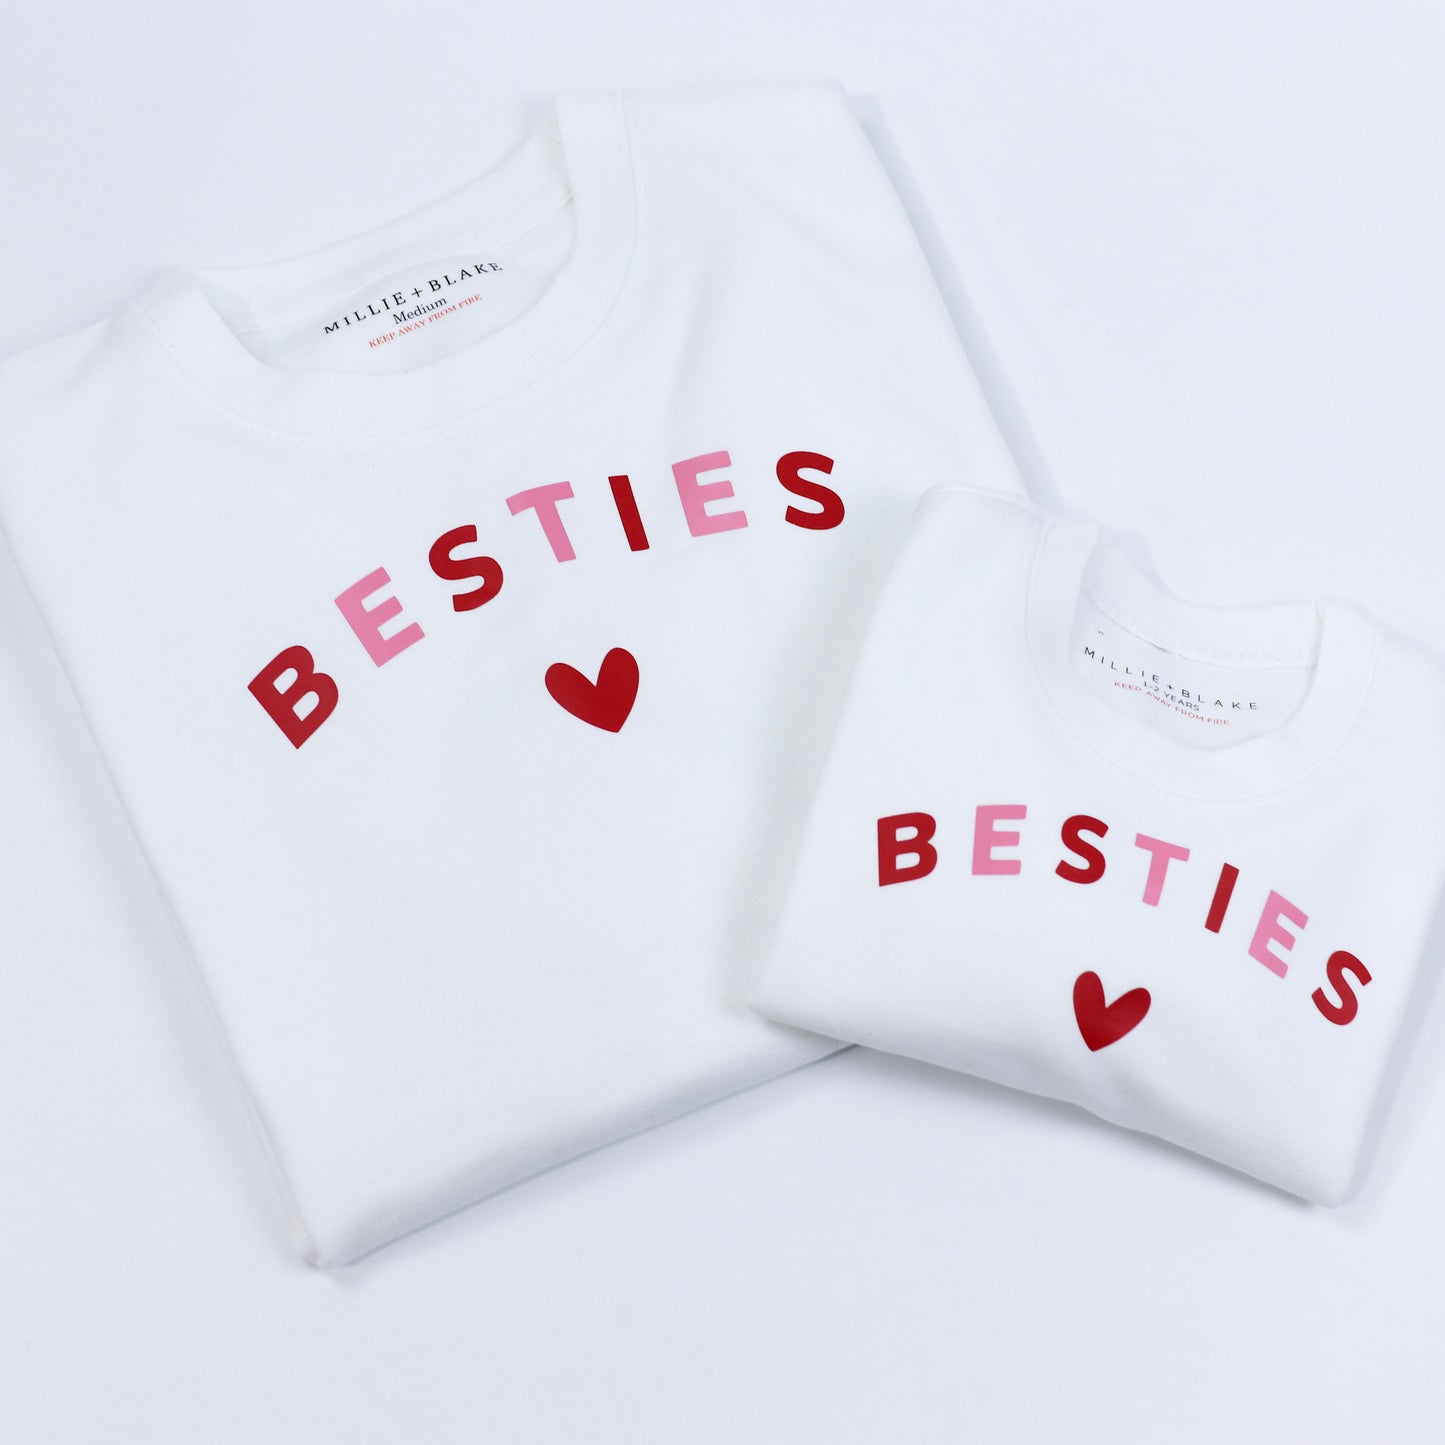 Besties Two Tone Soft Style Children's Sweatshirt (From 6-12 Months)  (Made to Order)